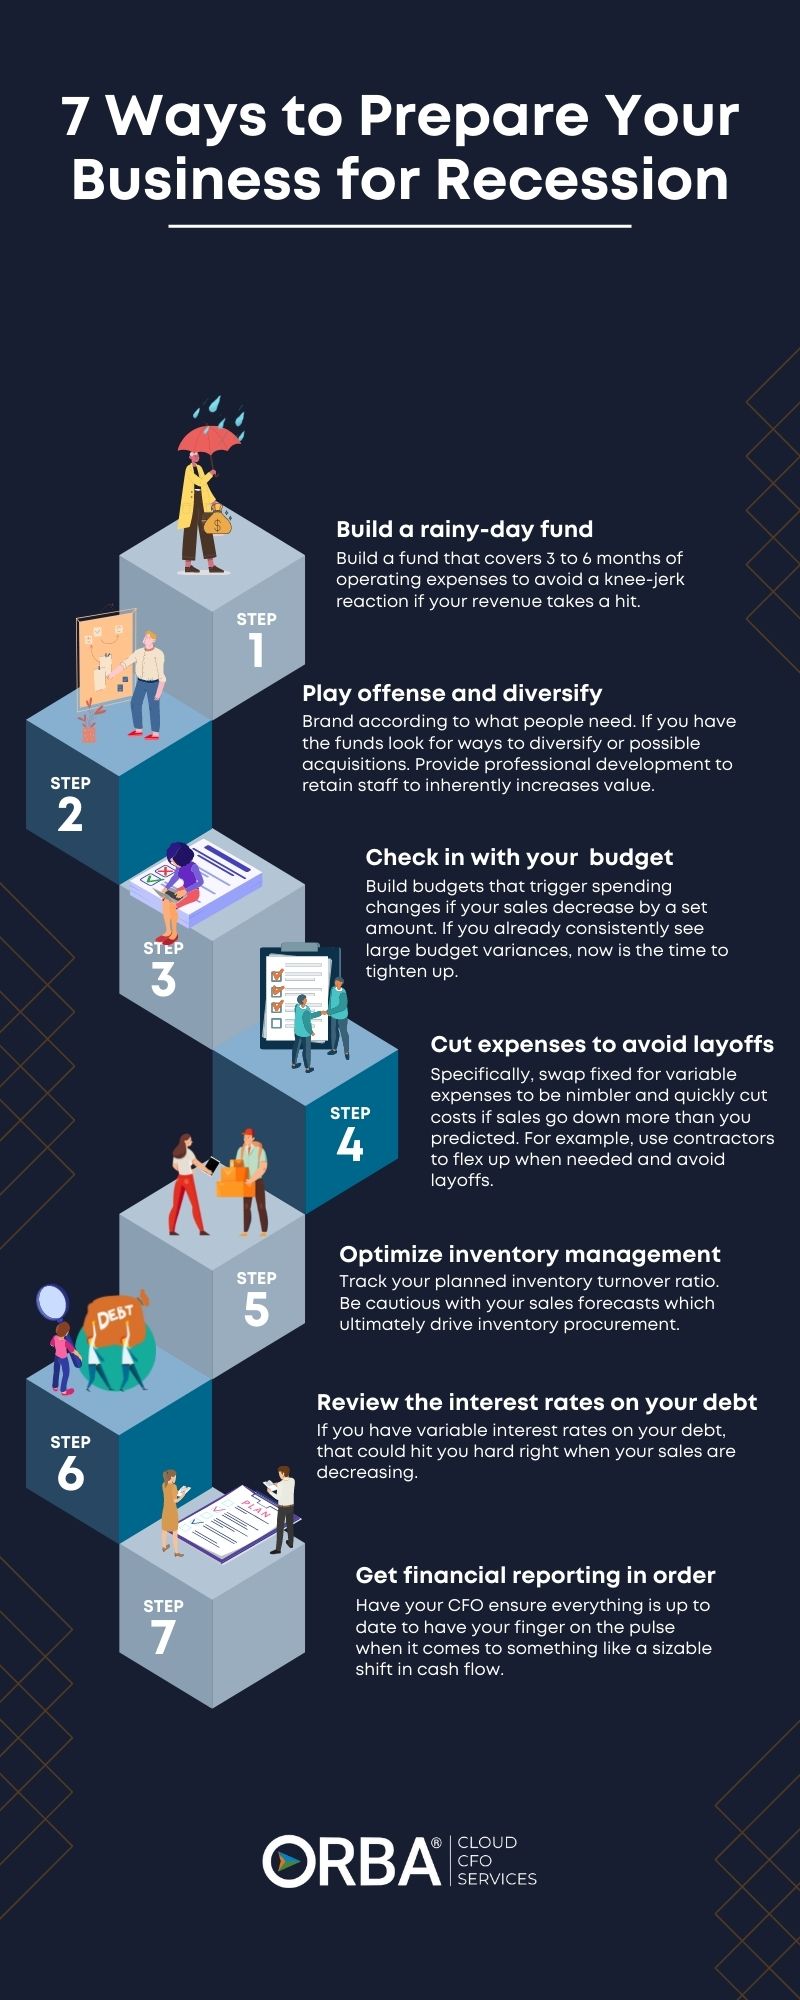 7 ways to prepare for recession infographic